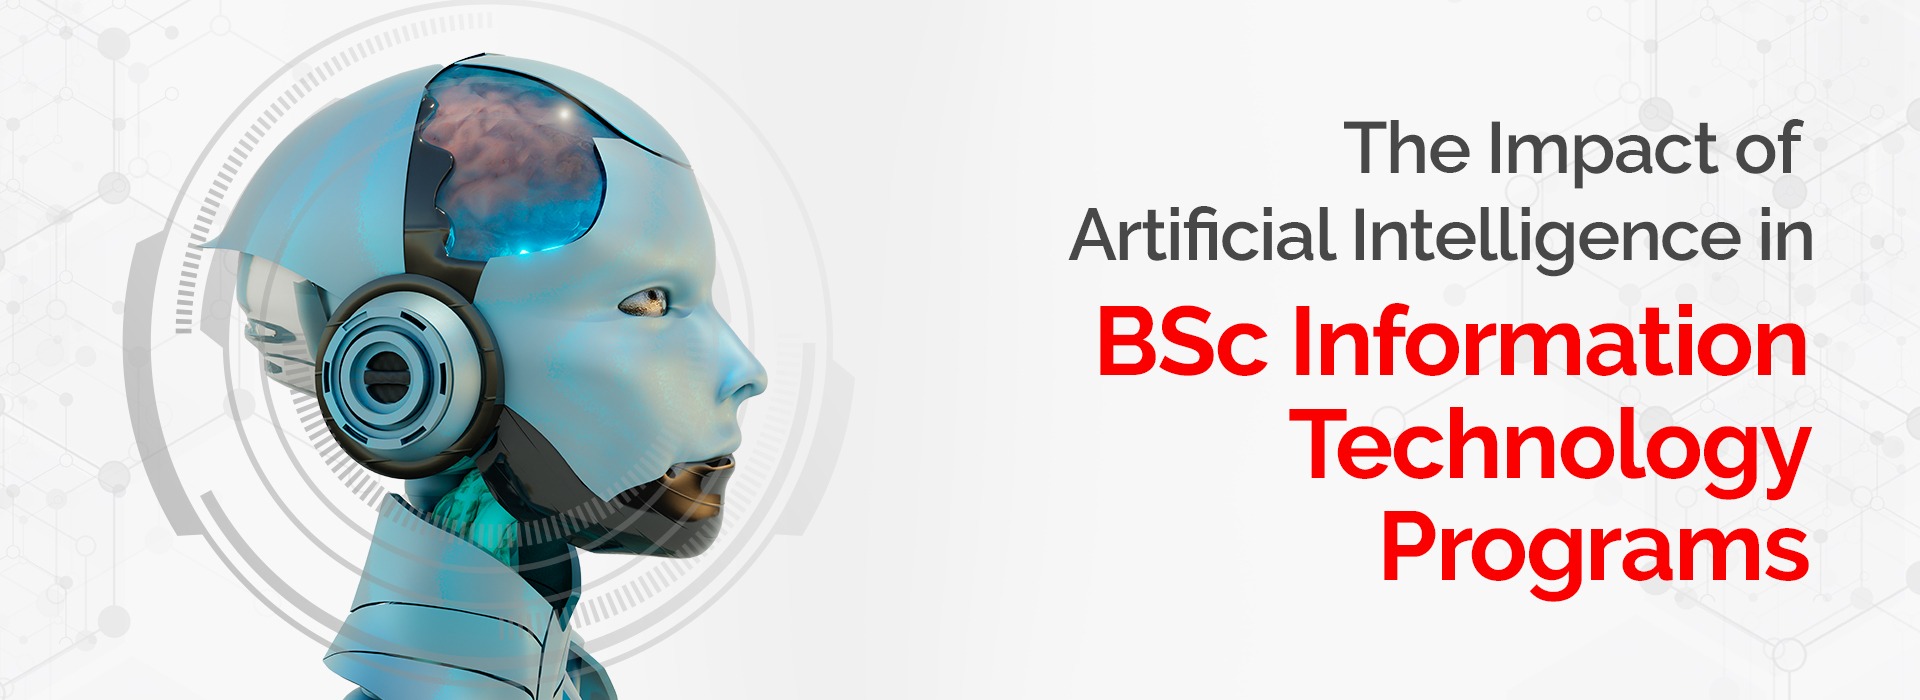 The Impact of Artificial Intelligence in BSc Information Technology Programs